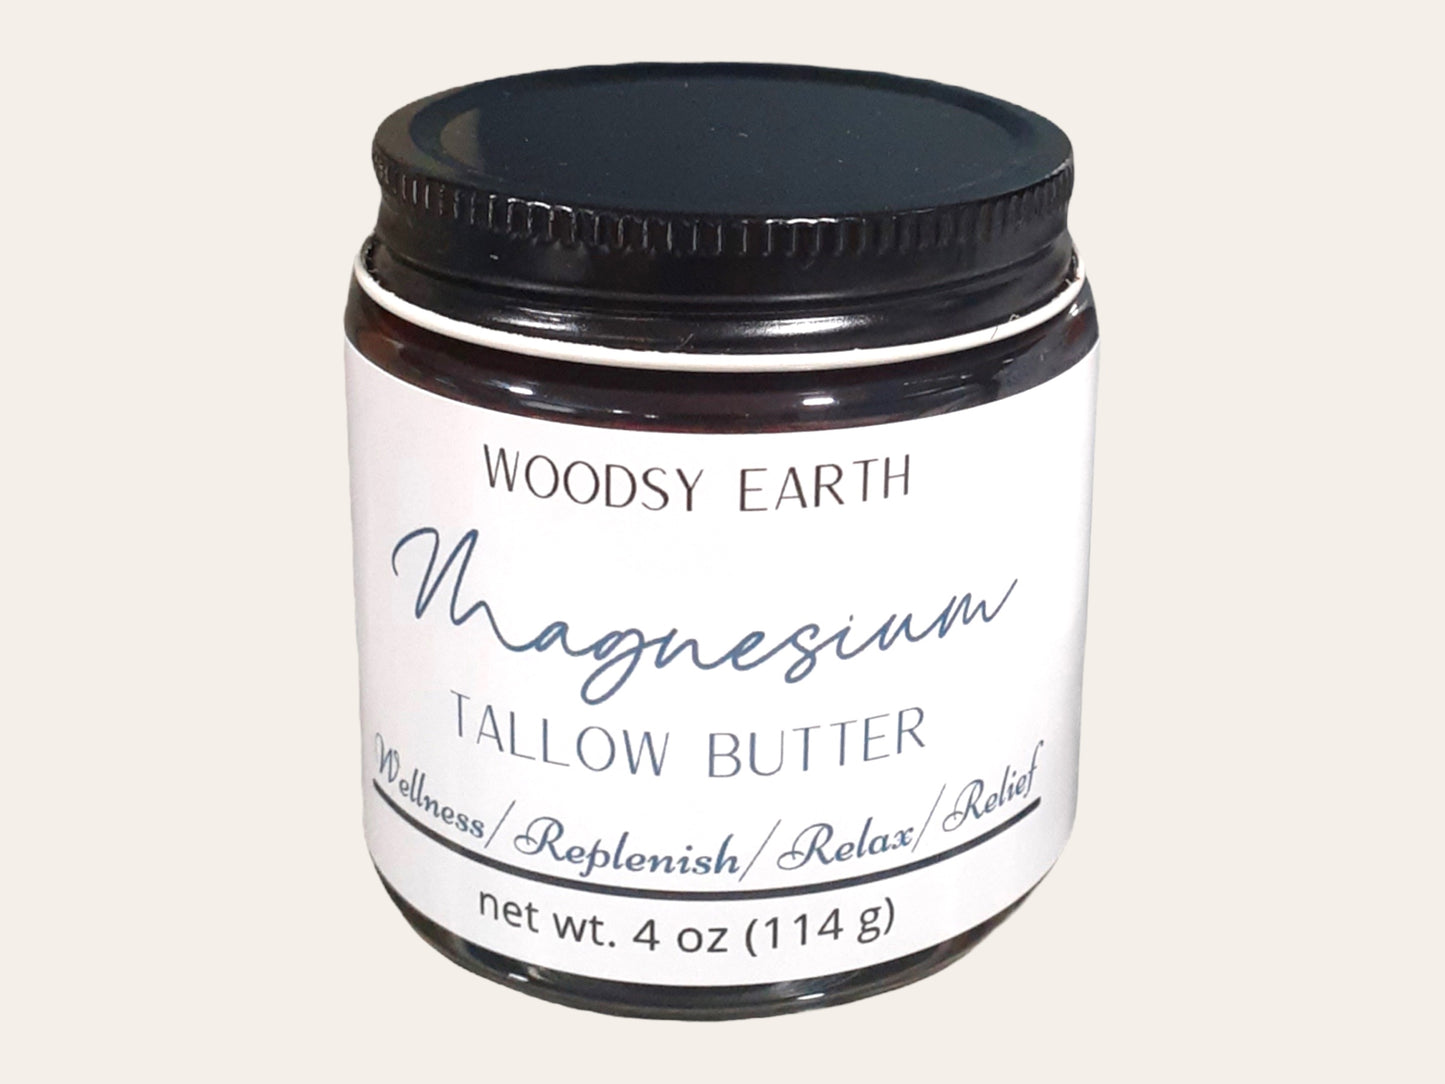 Magnesium butter - grass-fed beef tallow base with st.john's wort and rosemary infused into the tallow to relieve sore muscles and achy joints